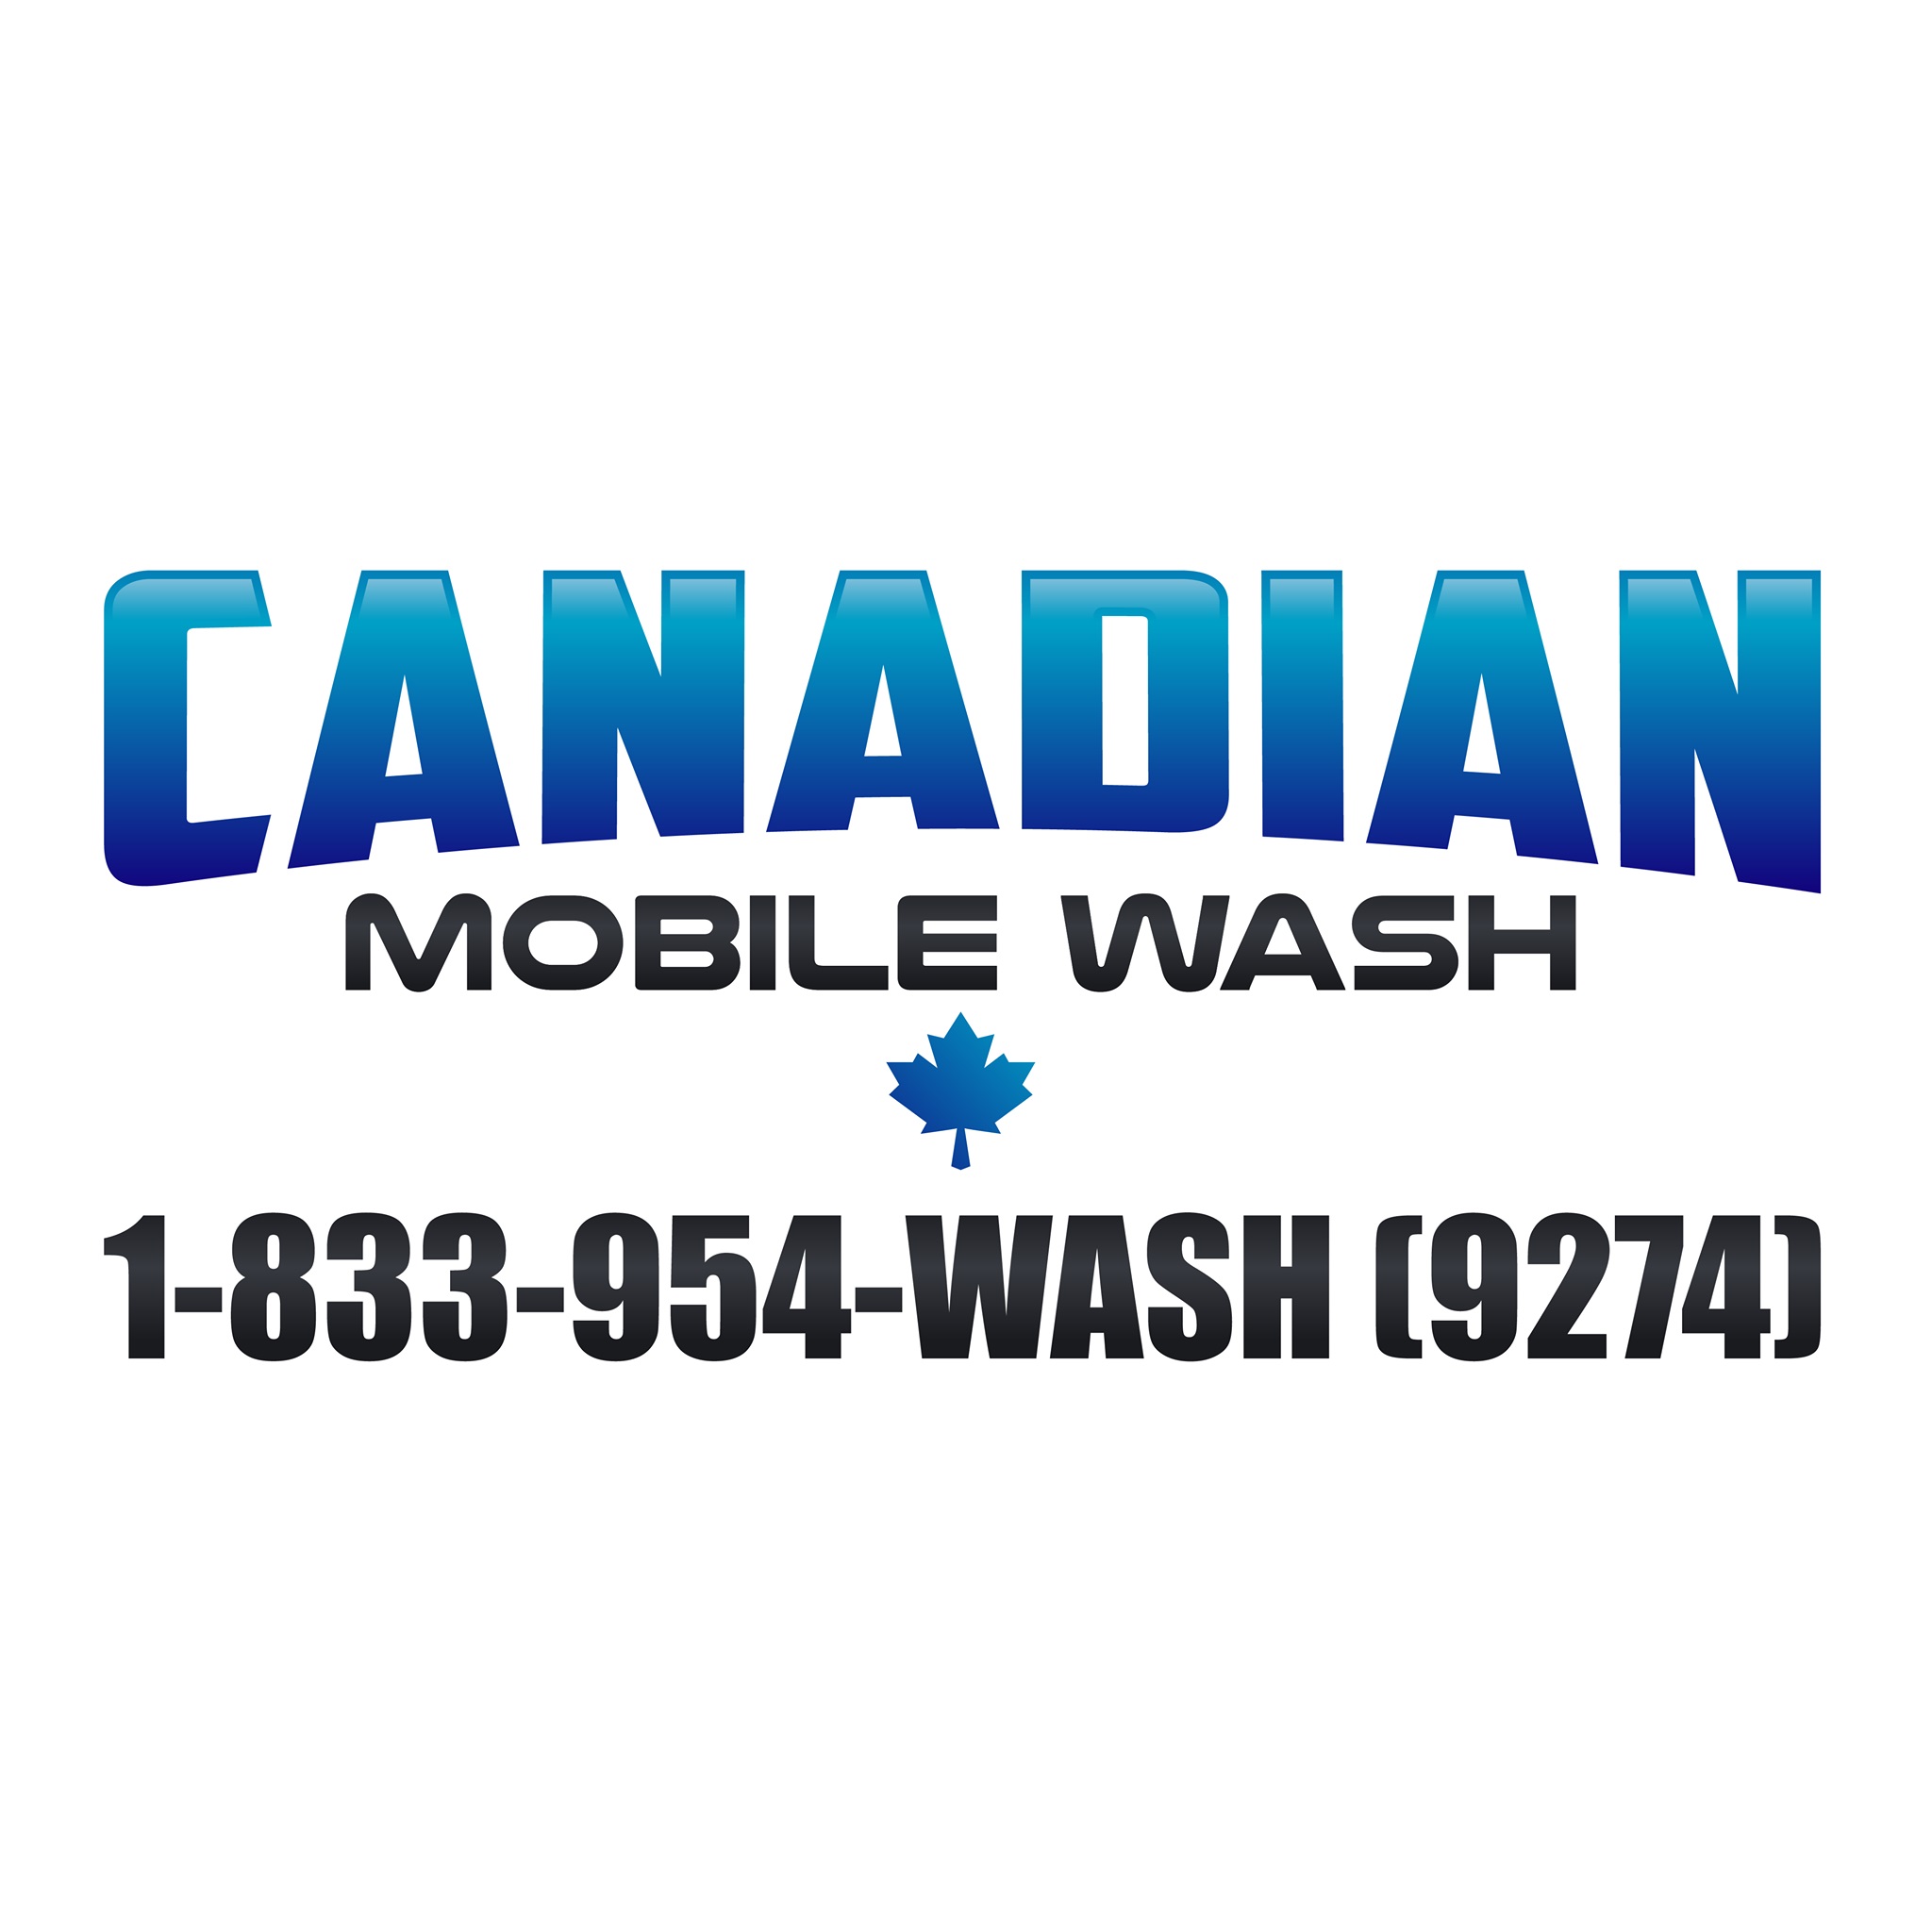 Canadian Mobile Wash